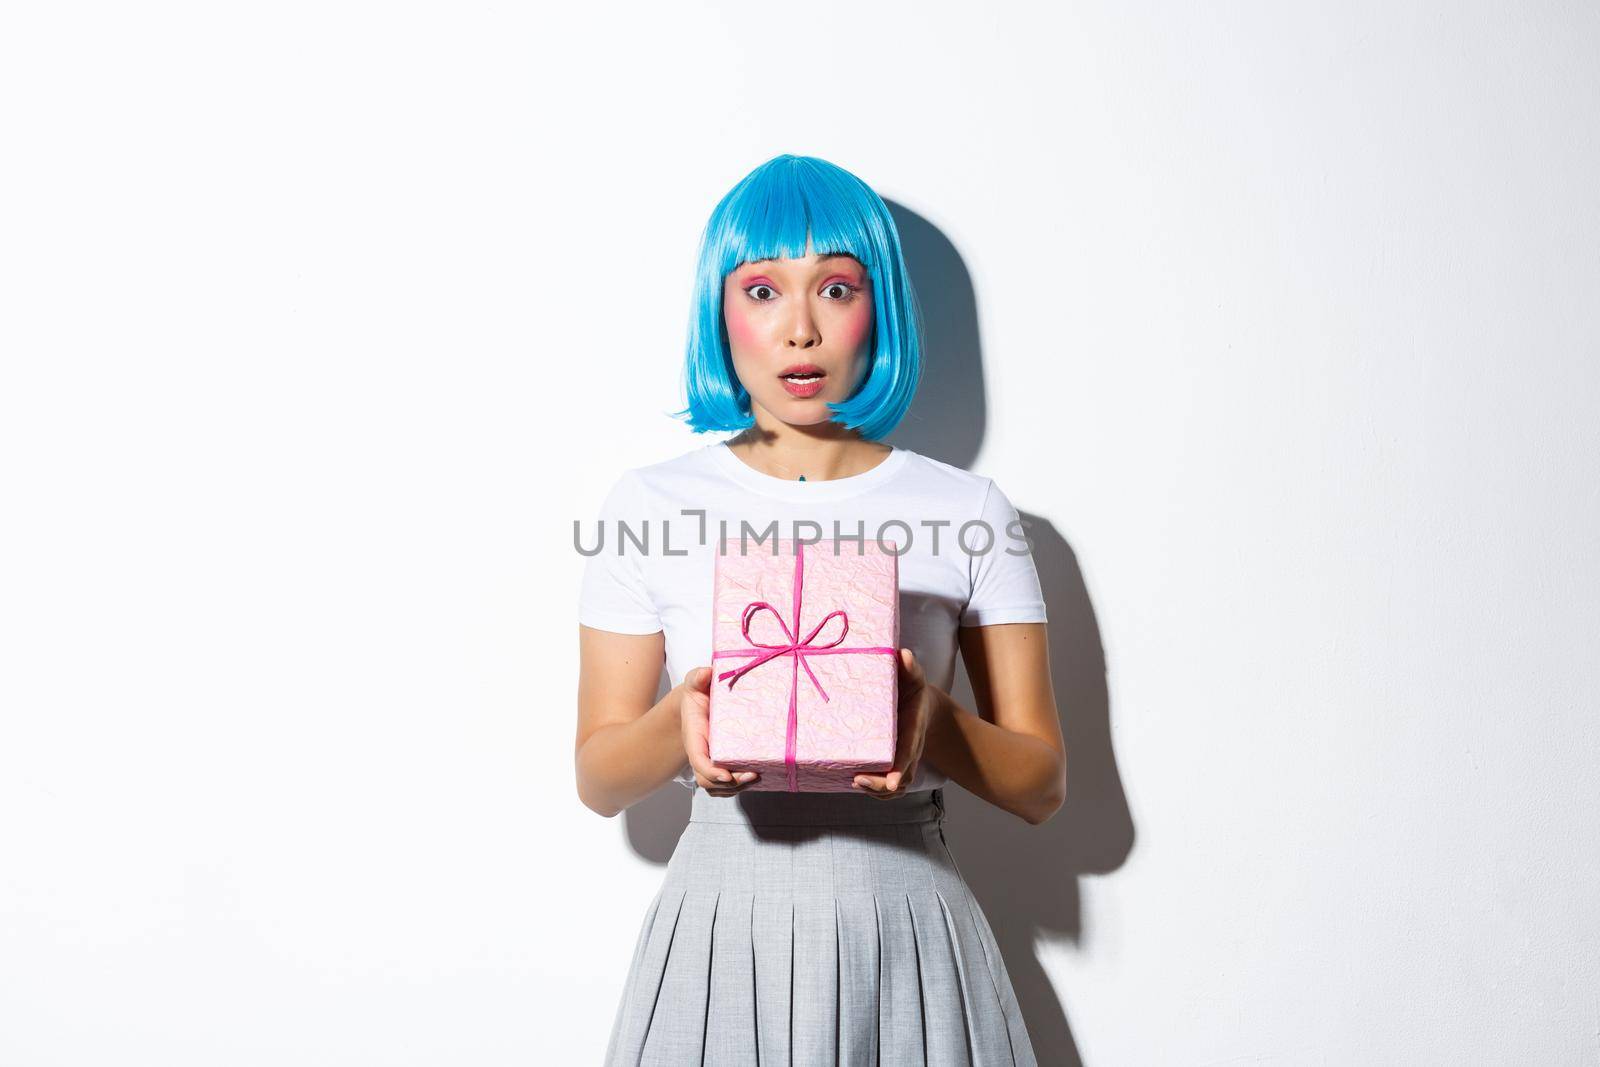 Surprised asian girl in blue party wig looking at camera confused, holding giftbox, standing over white background.